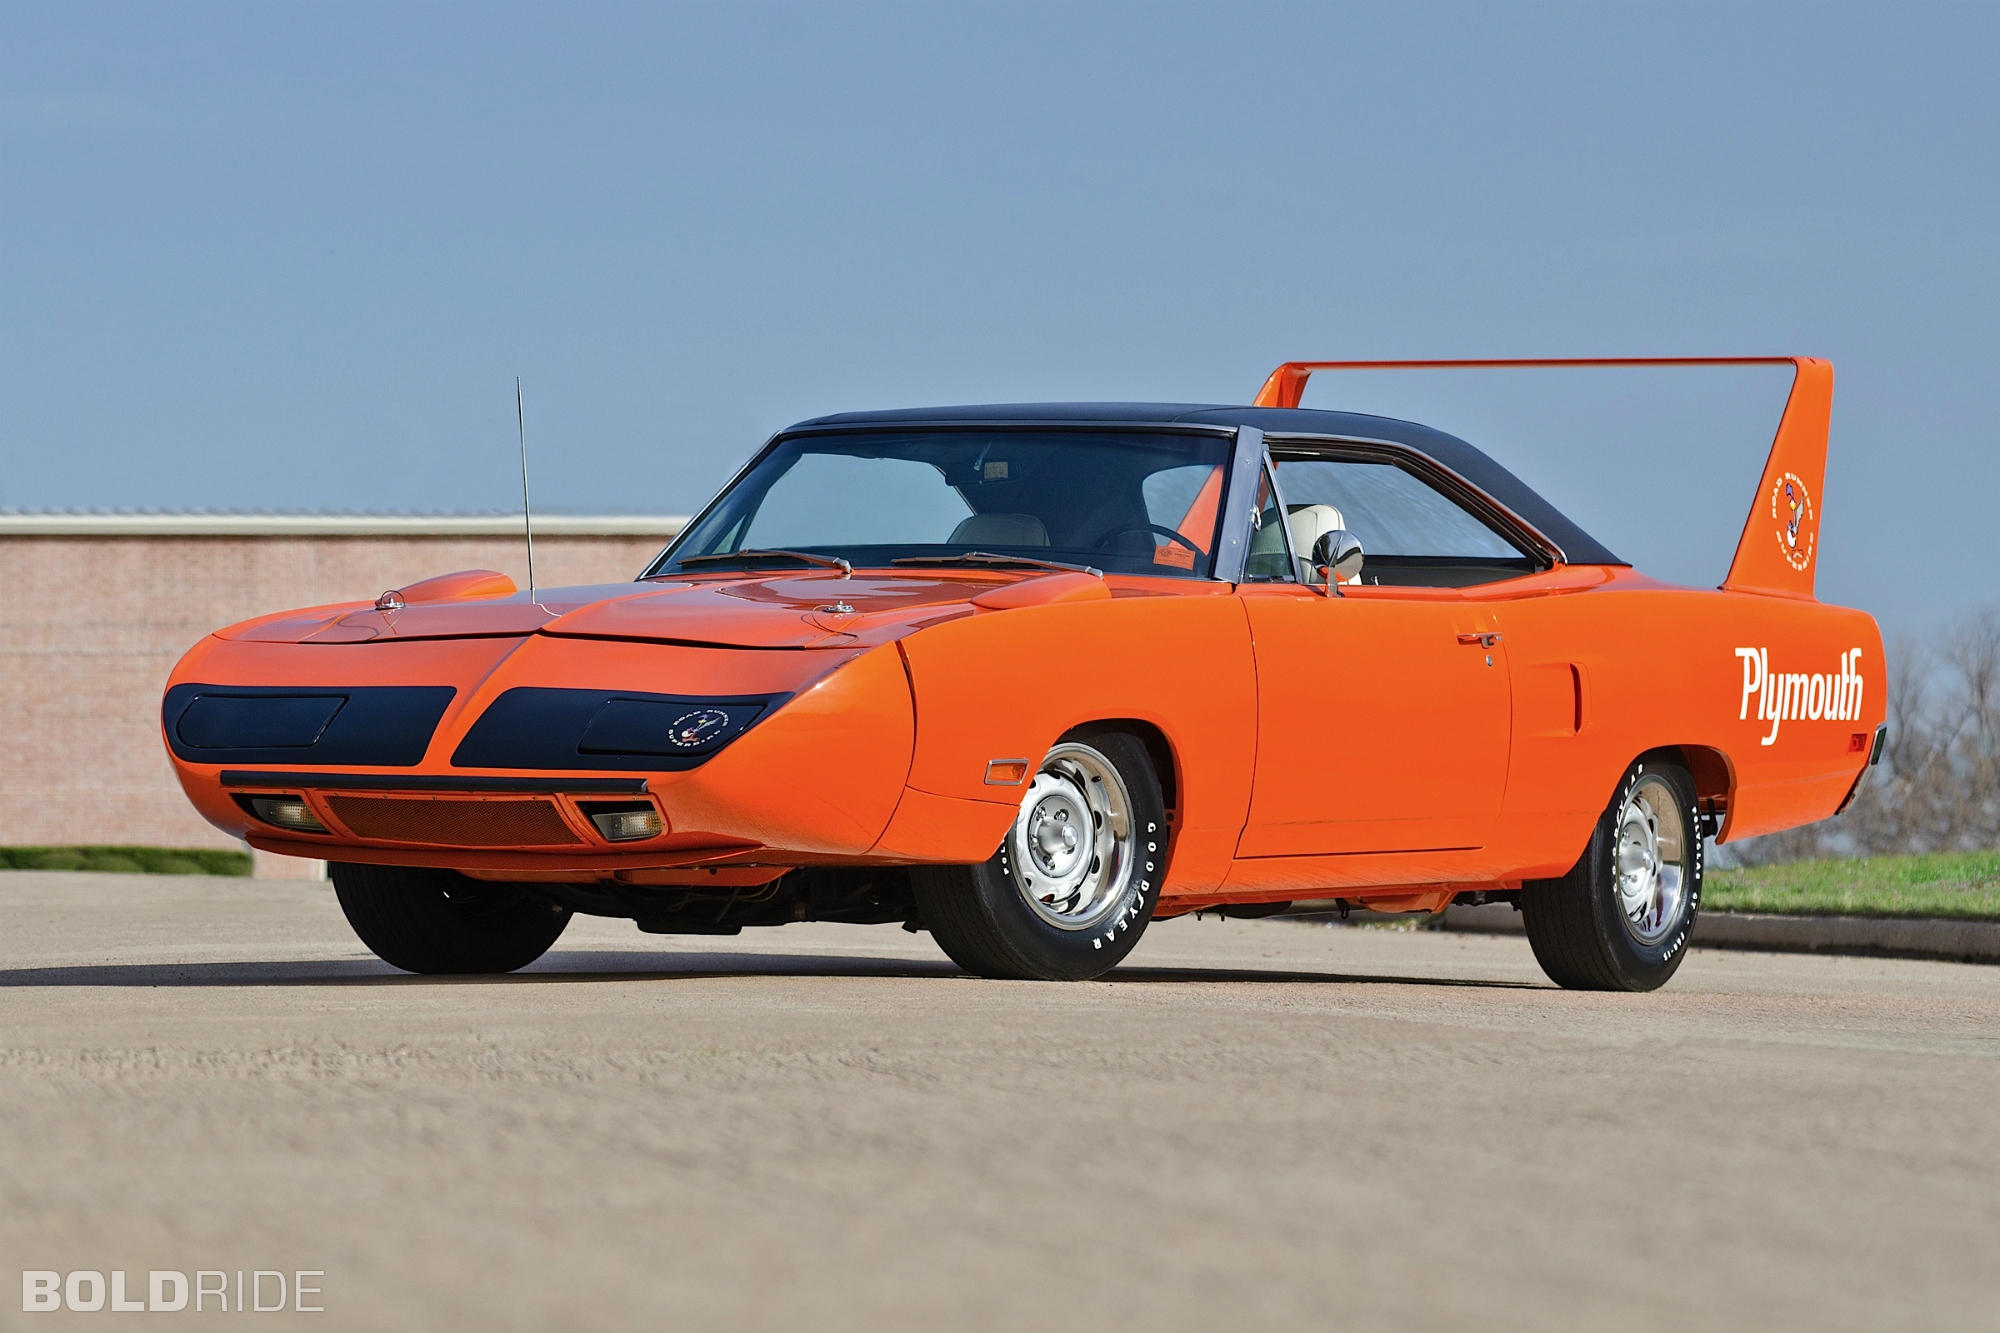 1970 Plymouth Superbird Backgrounds, Compatible - PC, Mobile, Gadgets| 2000x1333 px